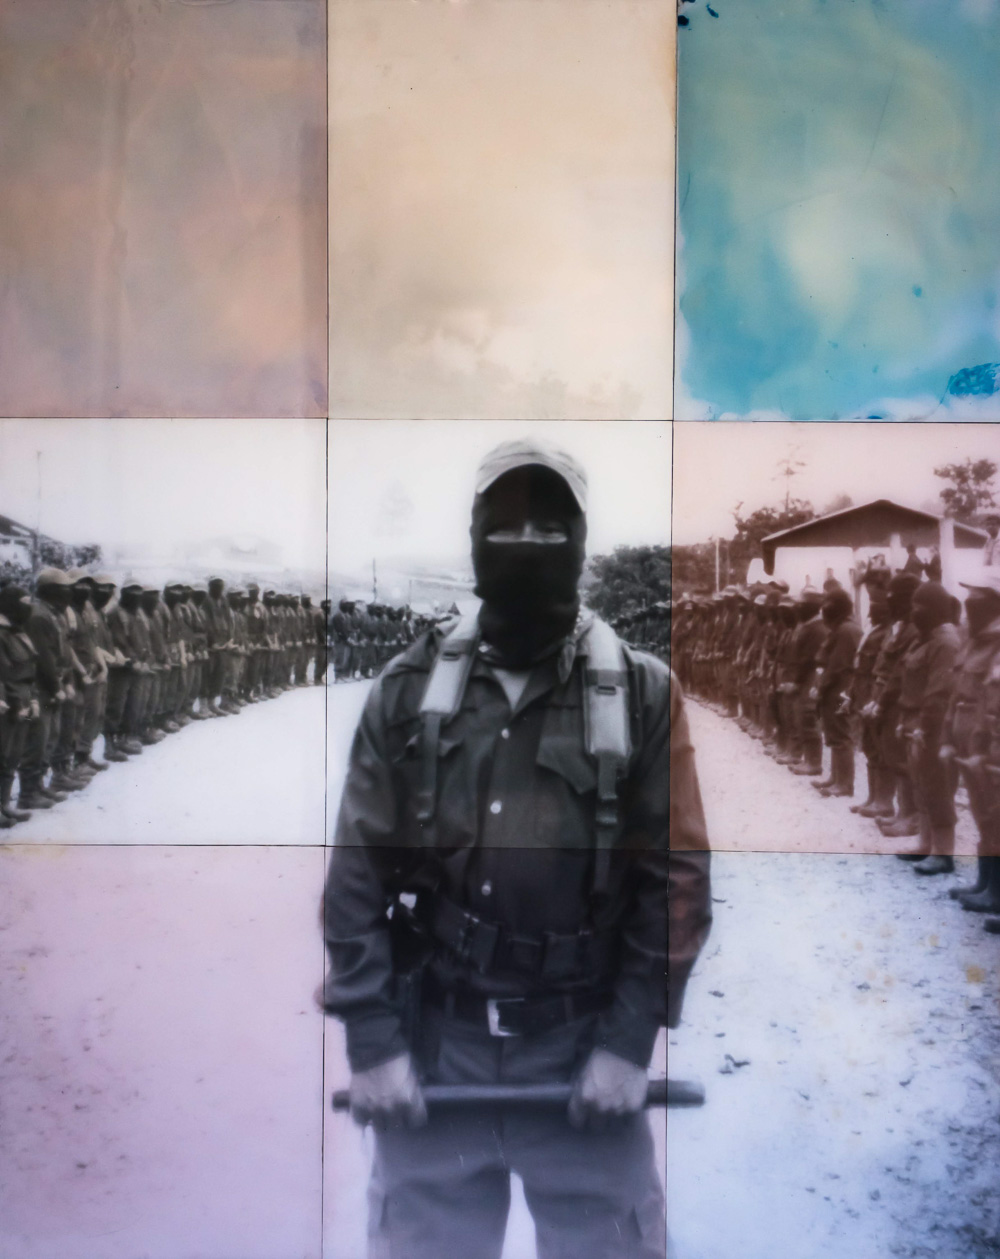 © Wayne Martin Belger, "Us & Them, Zapatista #2," 48" x 60" print from 9 sheets of 16" x 20" silver gelatin paper, toned with cochineal, prickly pear tea, and Zapatista coffee. 1 of 1, 2017 Zapatista commander with his platoon in a Zapatista military camp in Chiapas, Mexico close to the Guatemalan border. He declined to write a "words from the heart" message for the photo. He was a little busy.